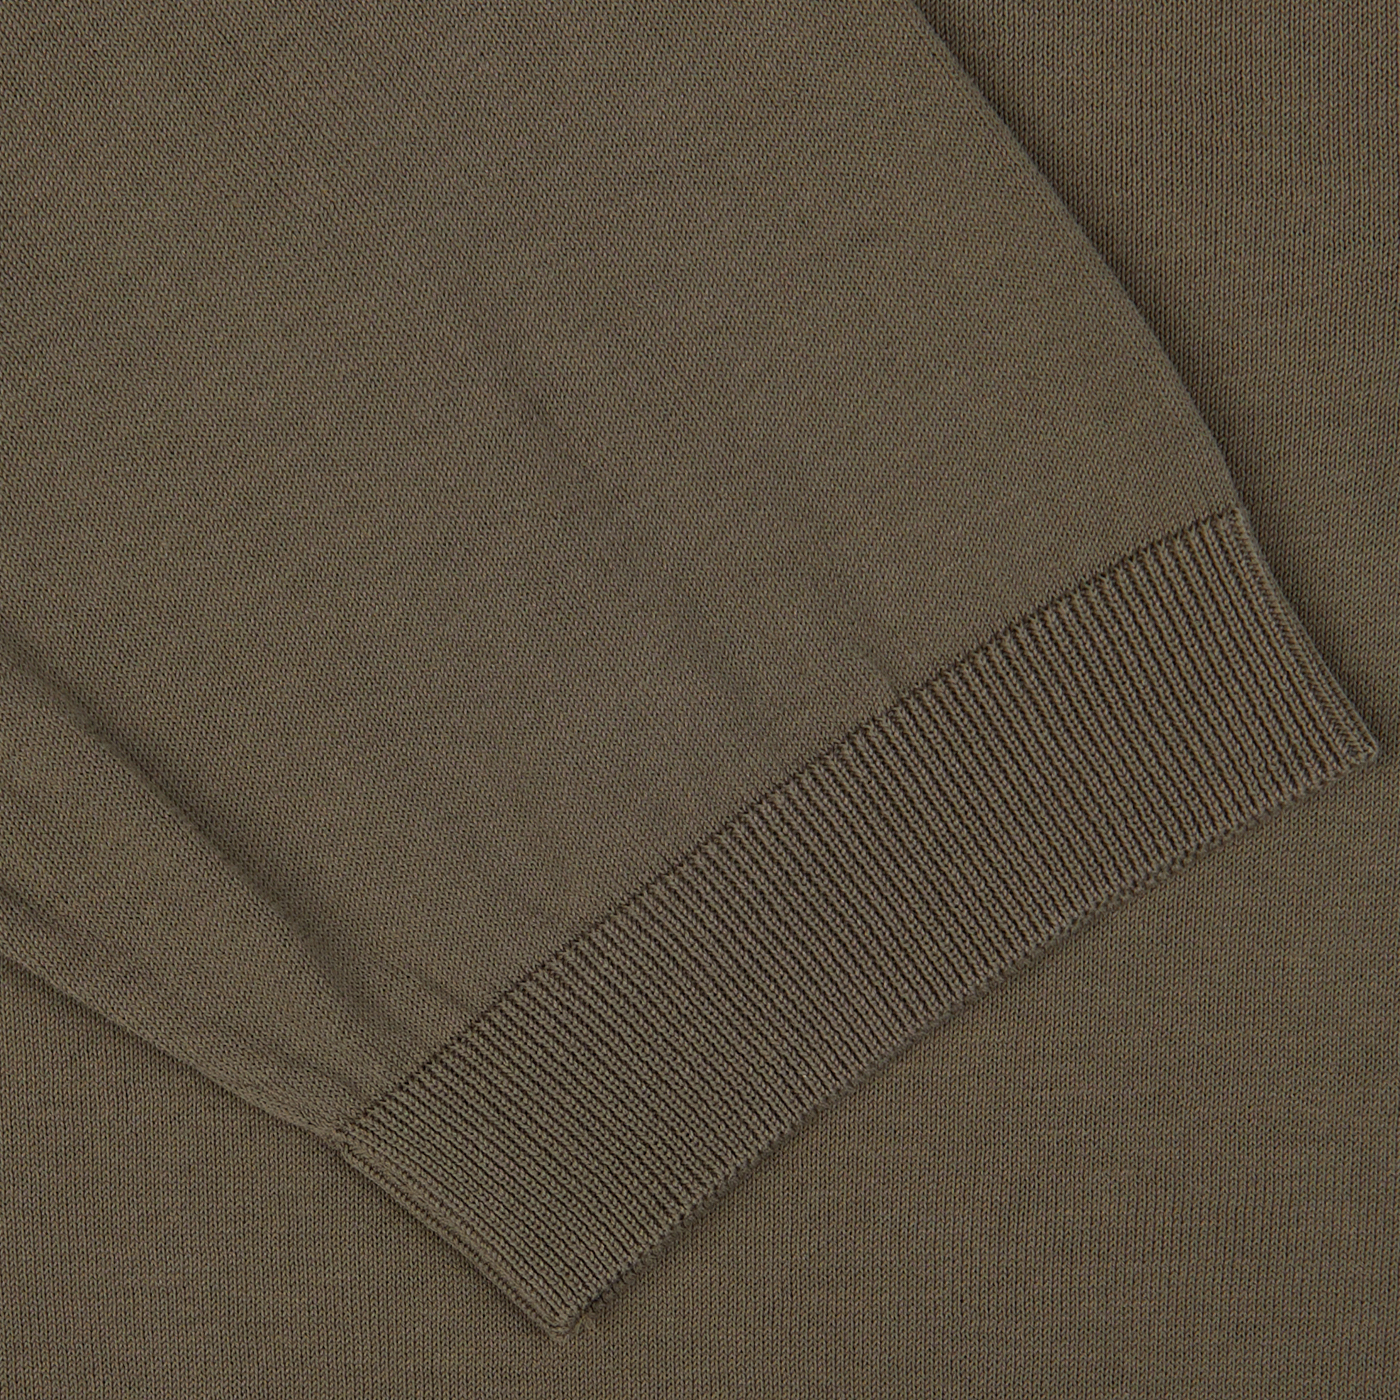 Close-up of a ribbed cuff on a Filippo de Laurentiis Olive Green Crepe Cotton Polo Shirt.